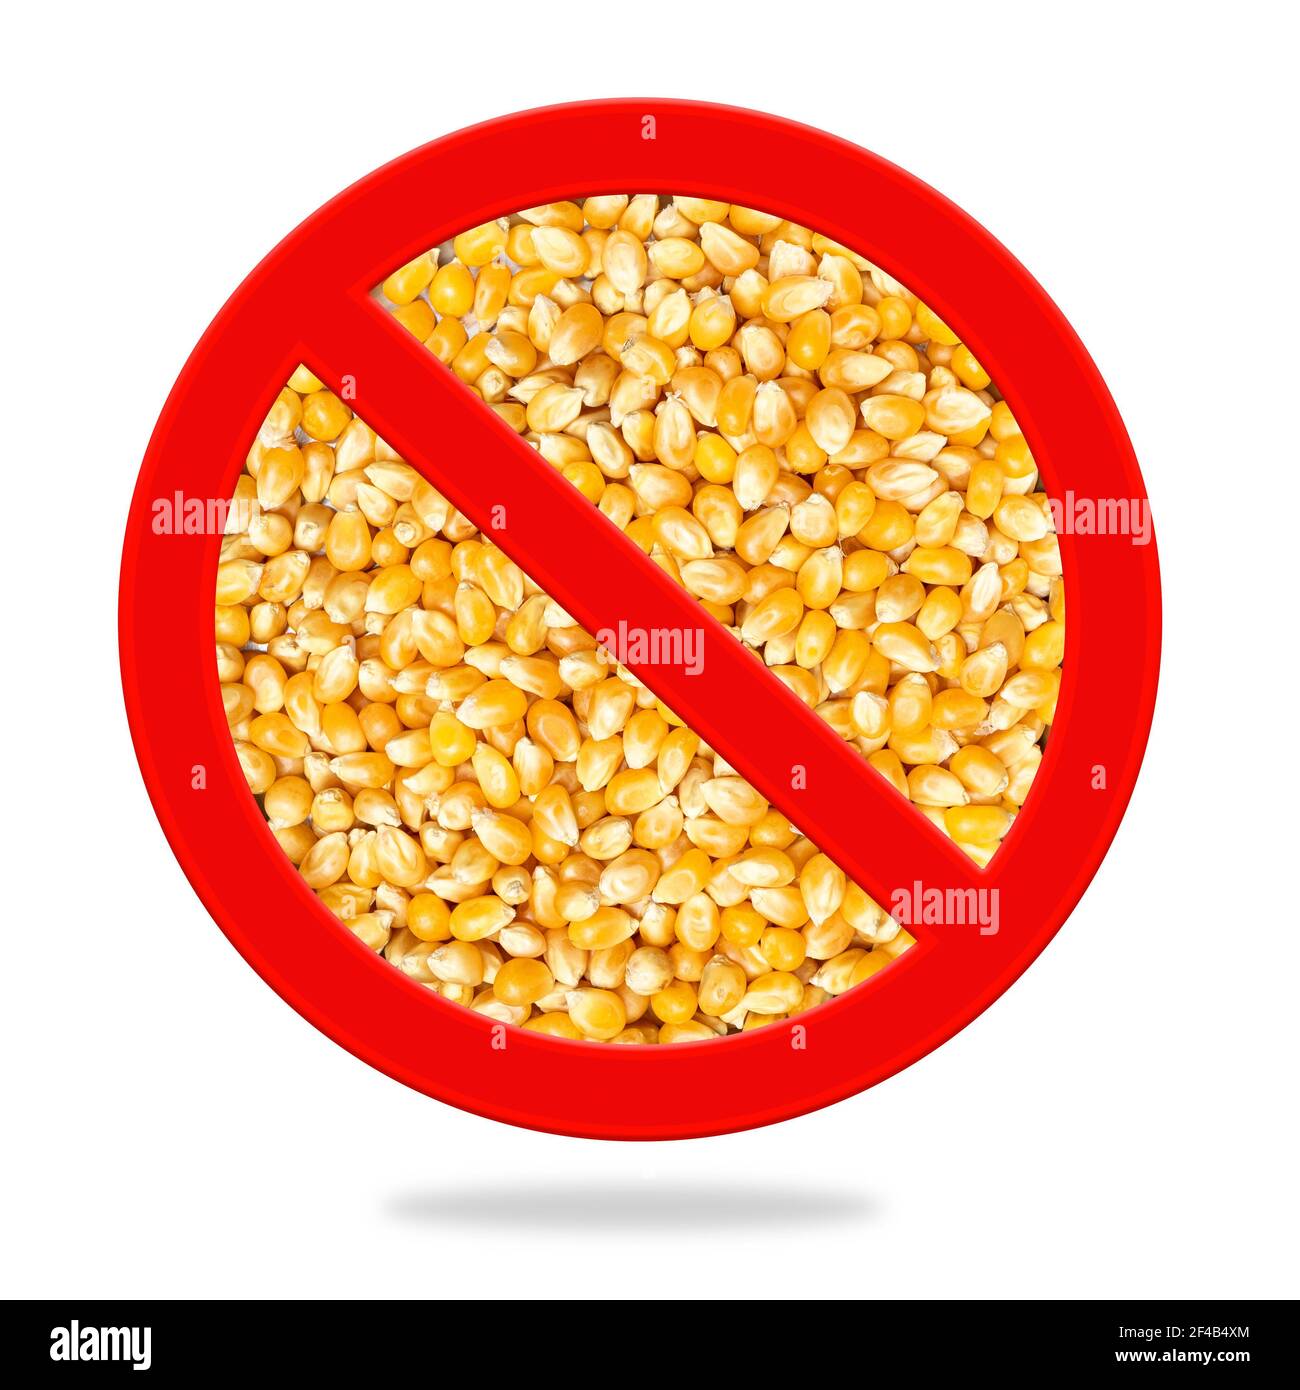 No corn sign. Red circular stop sign with corn kernels inside. Concept for corn gluten meal in pet food industry, corn by-products in food or corn-fre Stock Photo